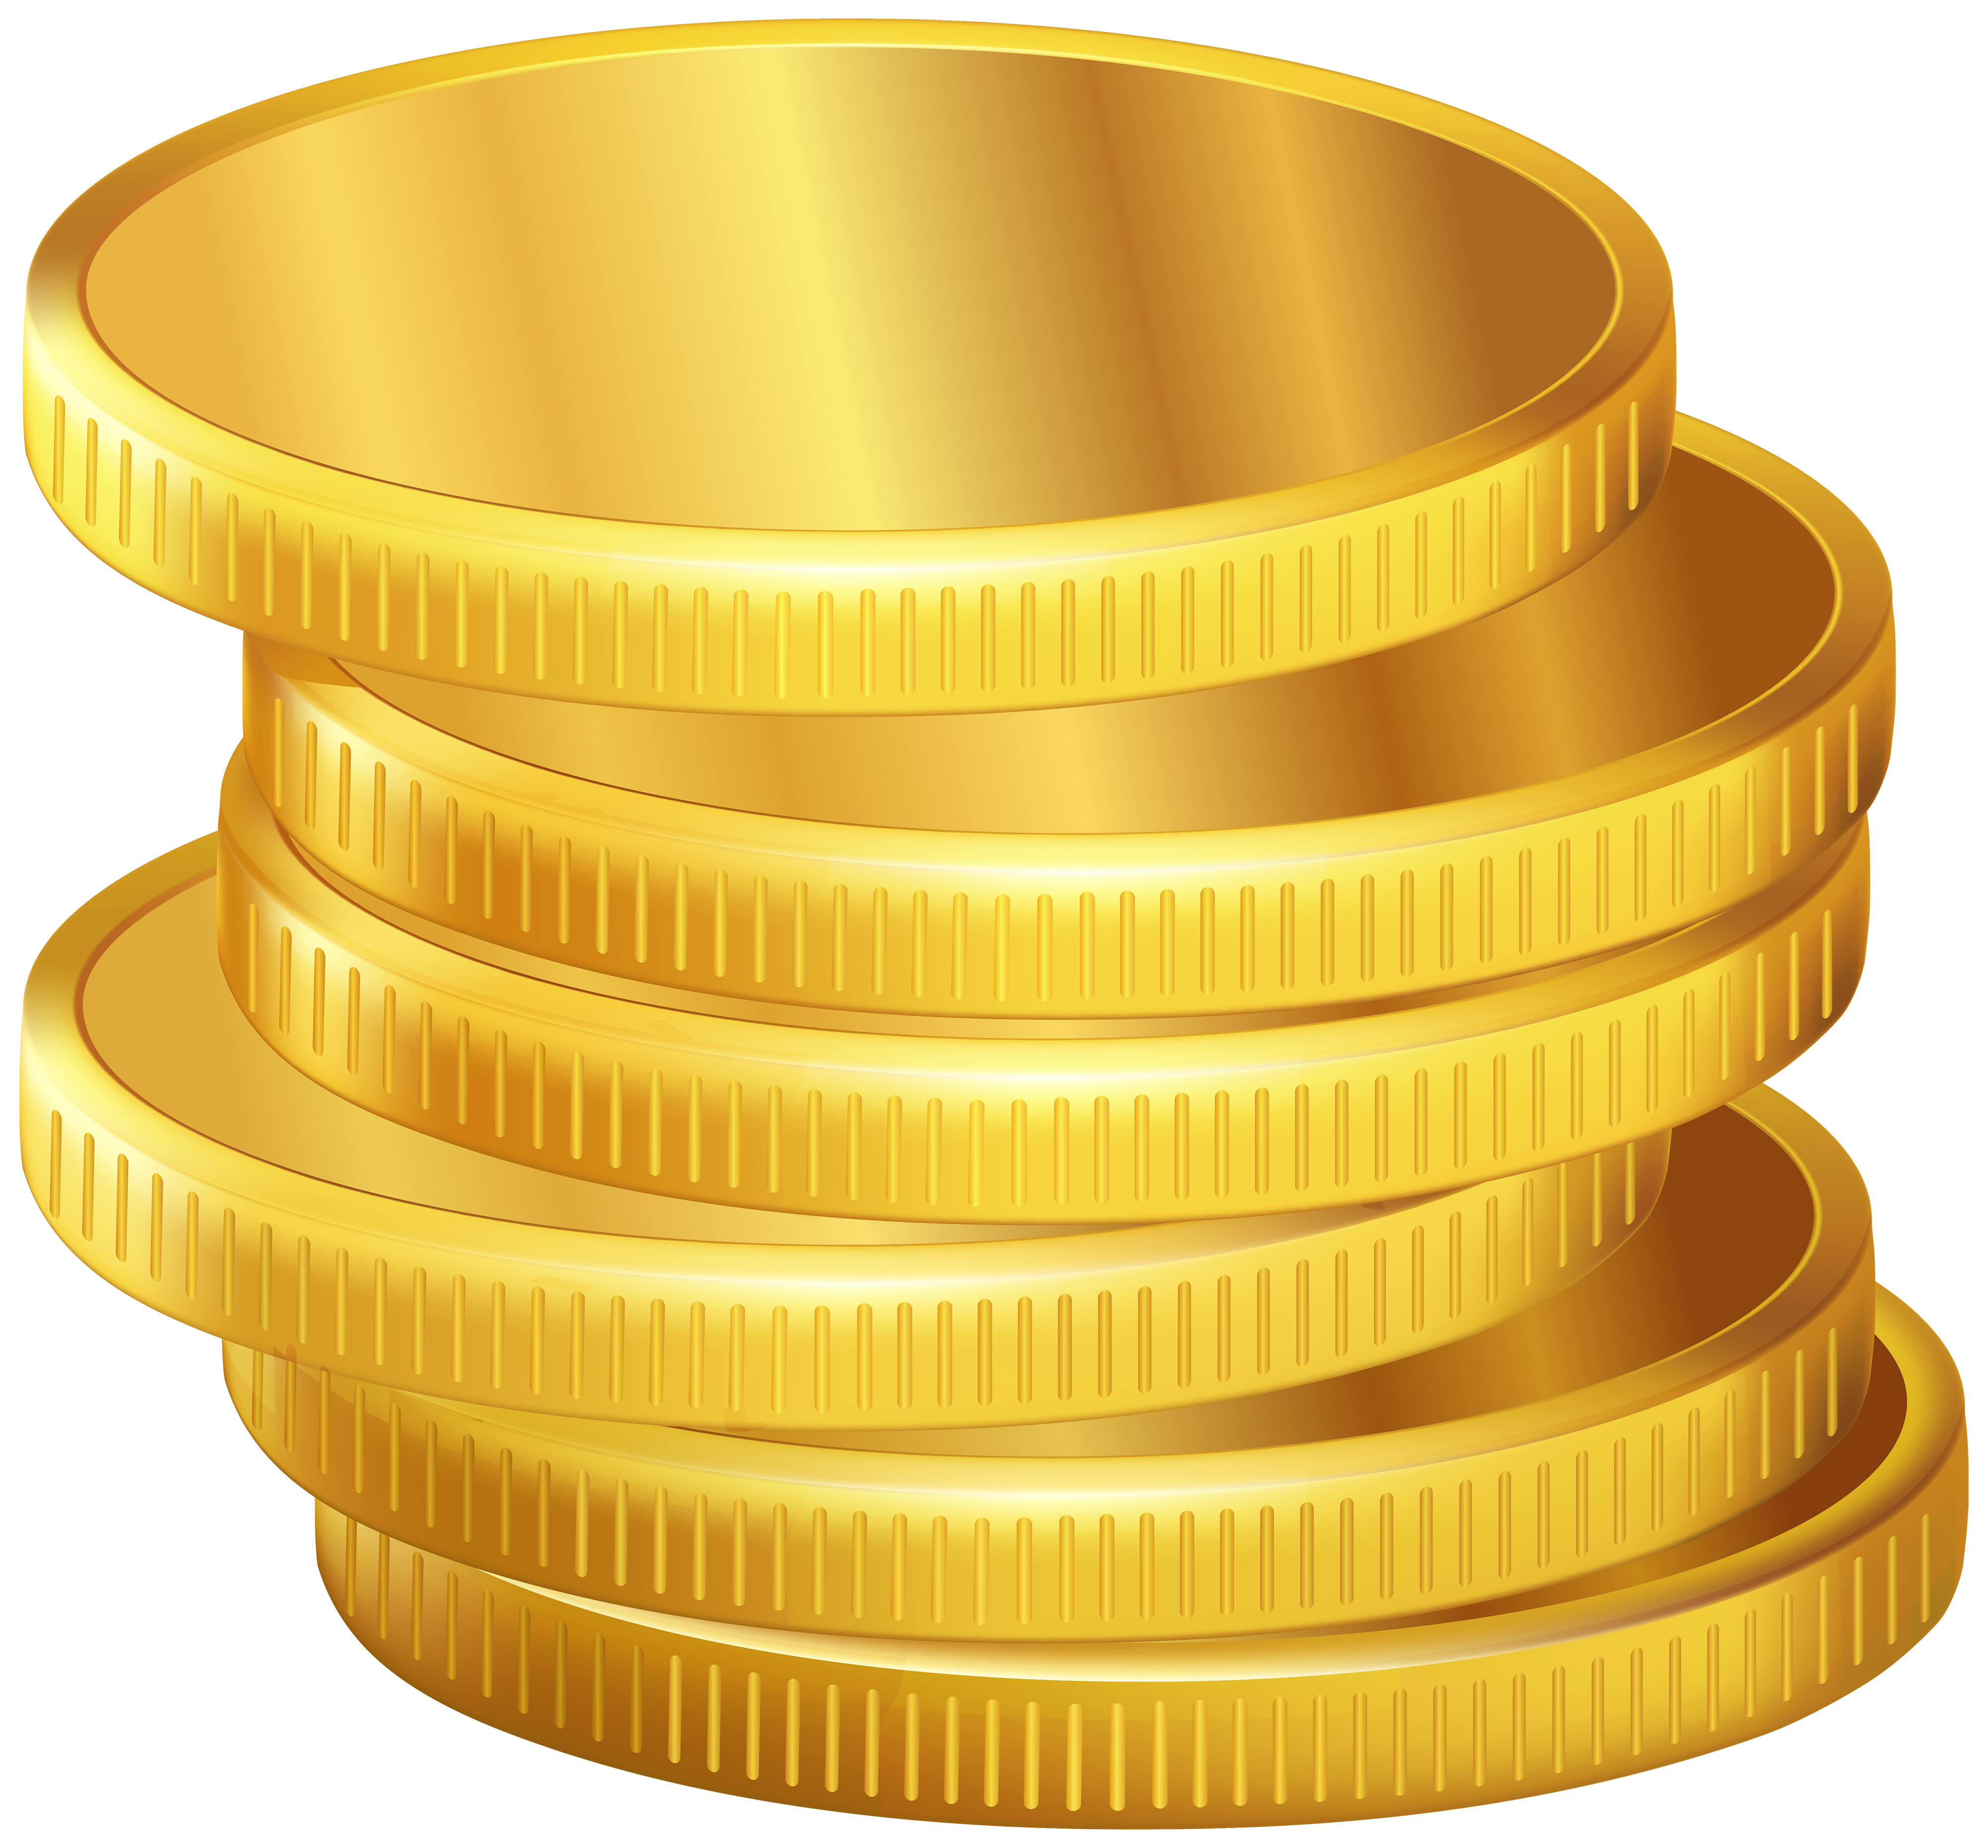 Coin Png Images - Free Download on Freepik